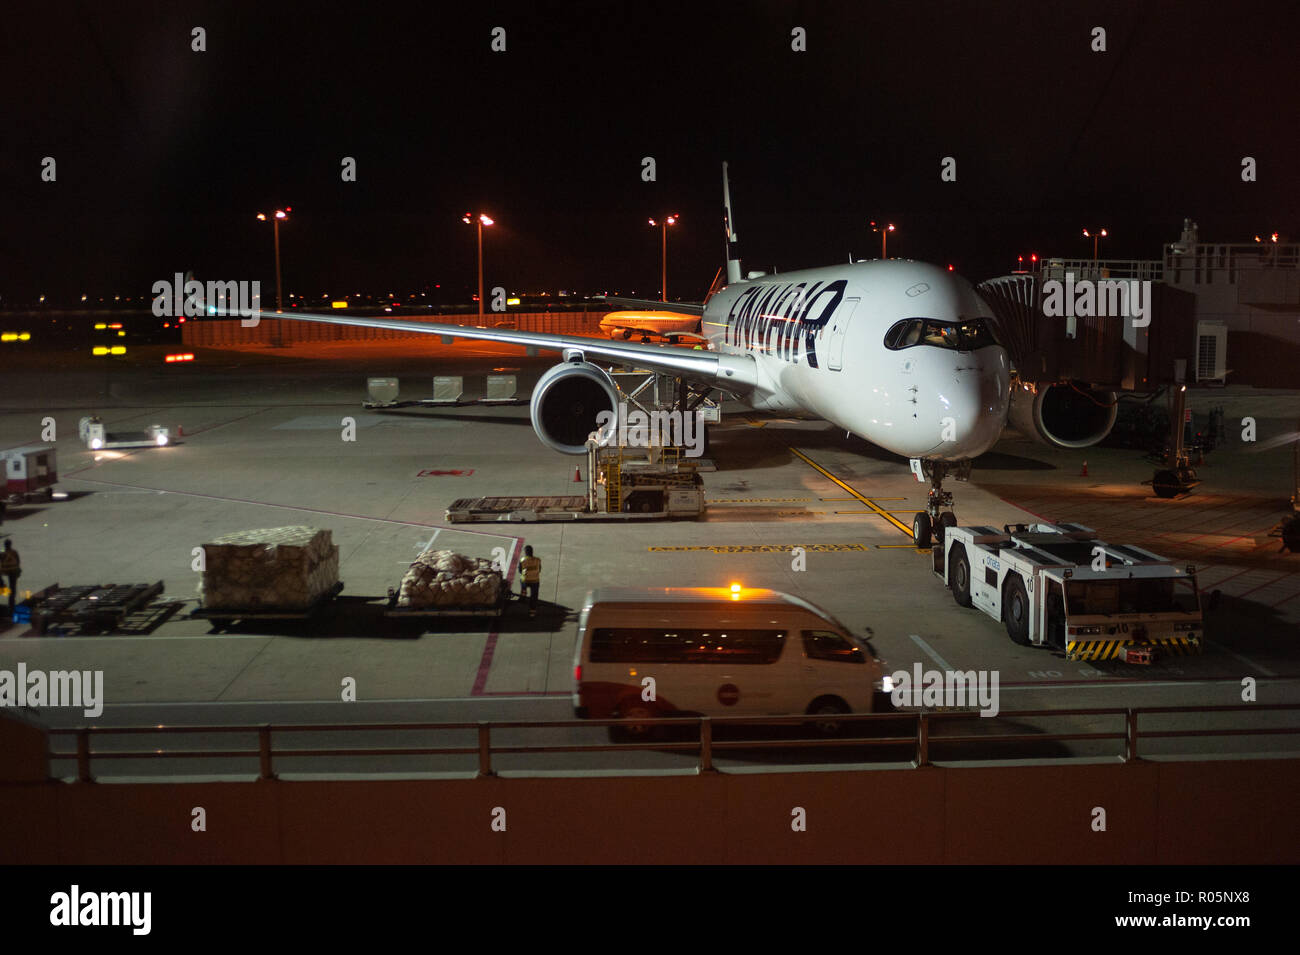 03.06.2018 - Singapore, Republic of Singapore, Asia - A Finnair Airbus A350 passenger plane is parked at a gate at Singapore's Changi airport. Stock Photo